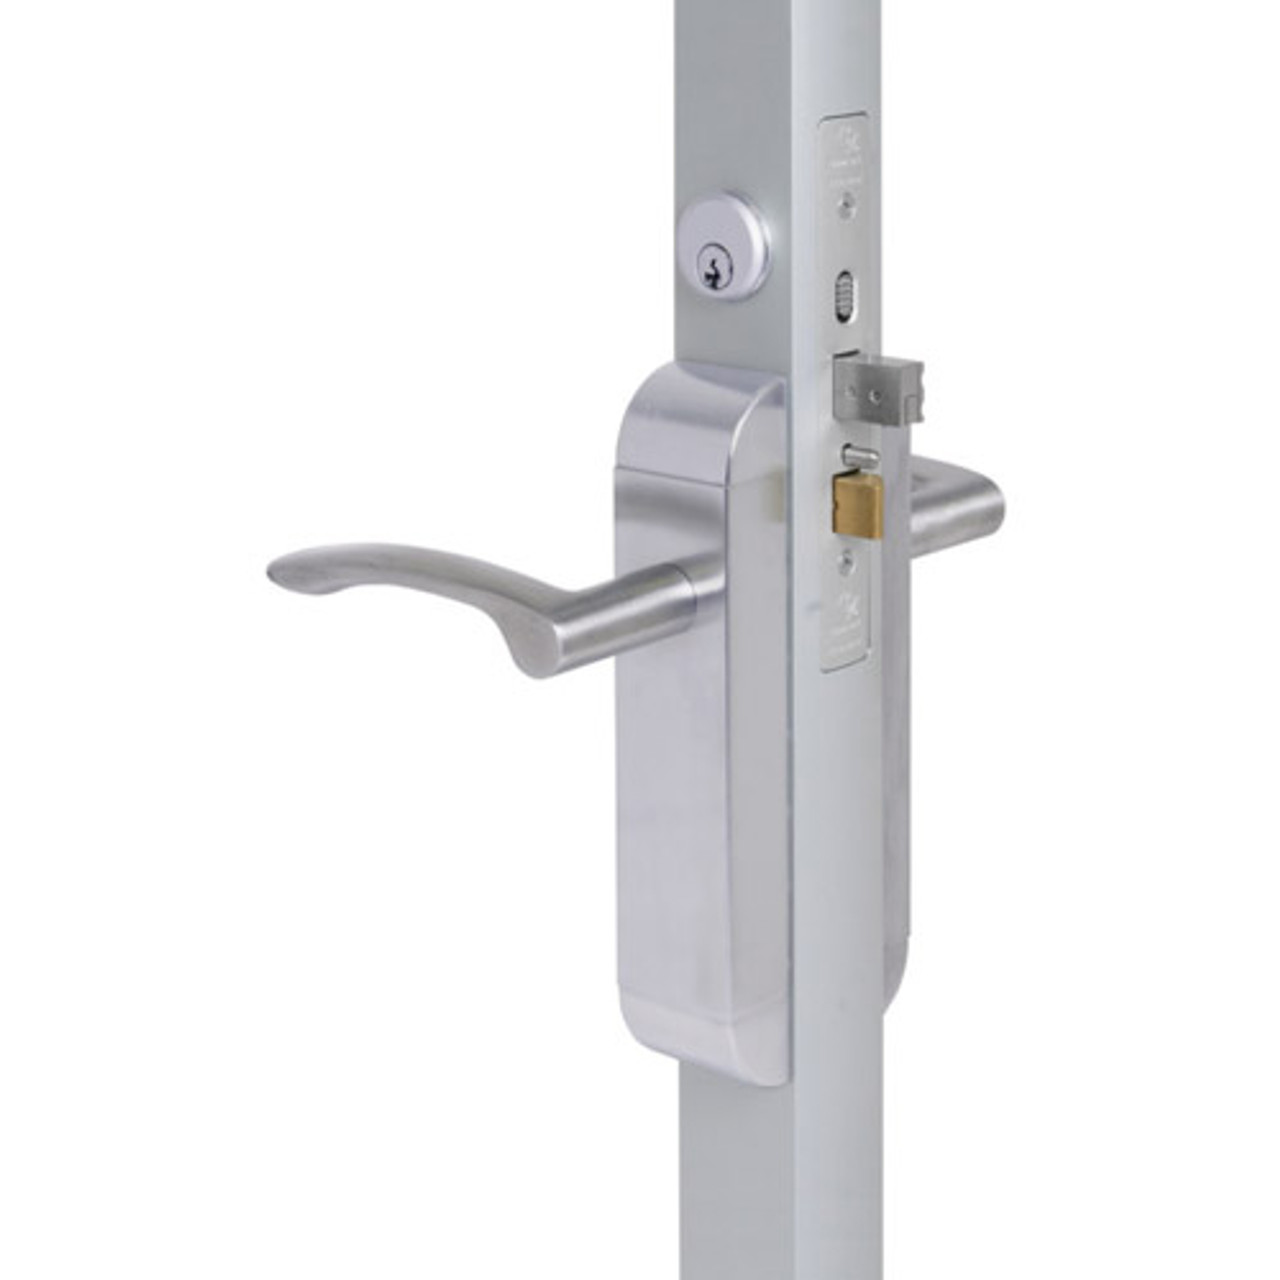 2190-441-301-32 Adams Rite Dual Force Interconnected 2190 series Deadlock/Deadlatch in Bright Stainless